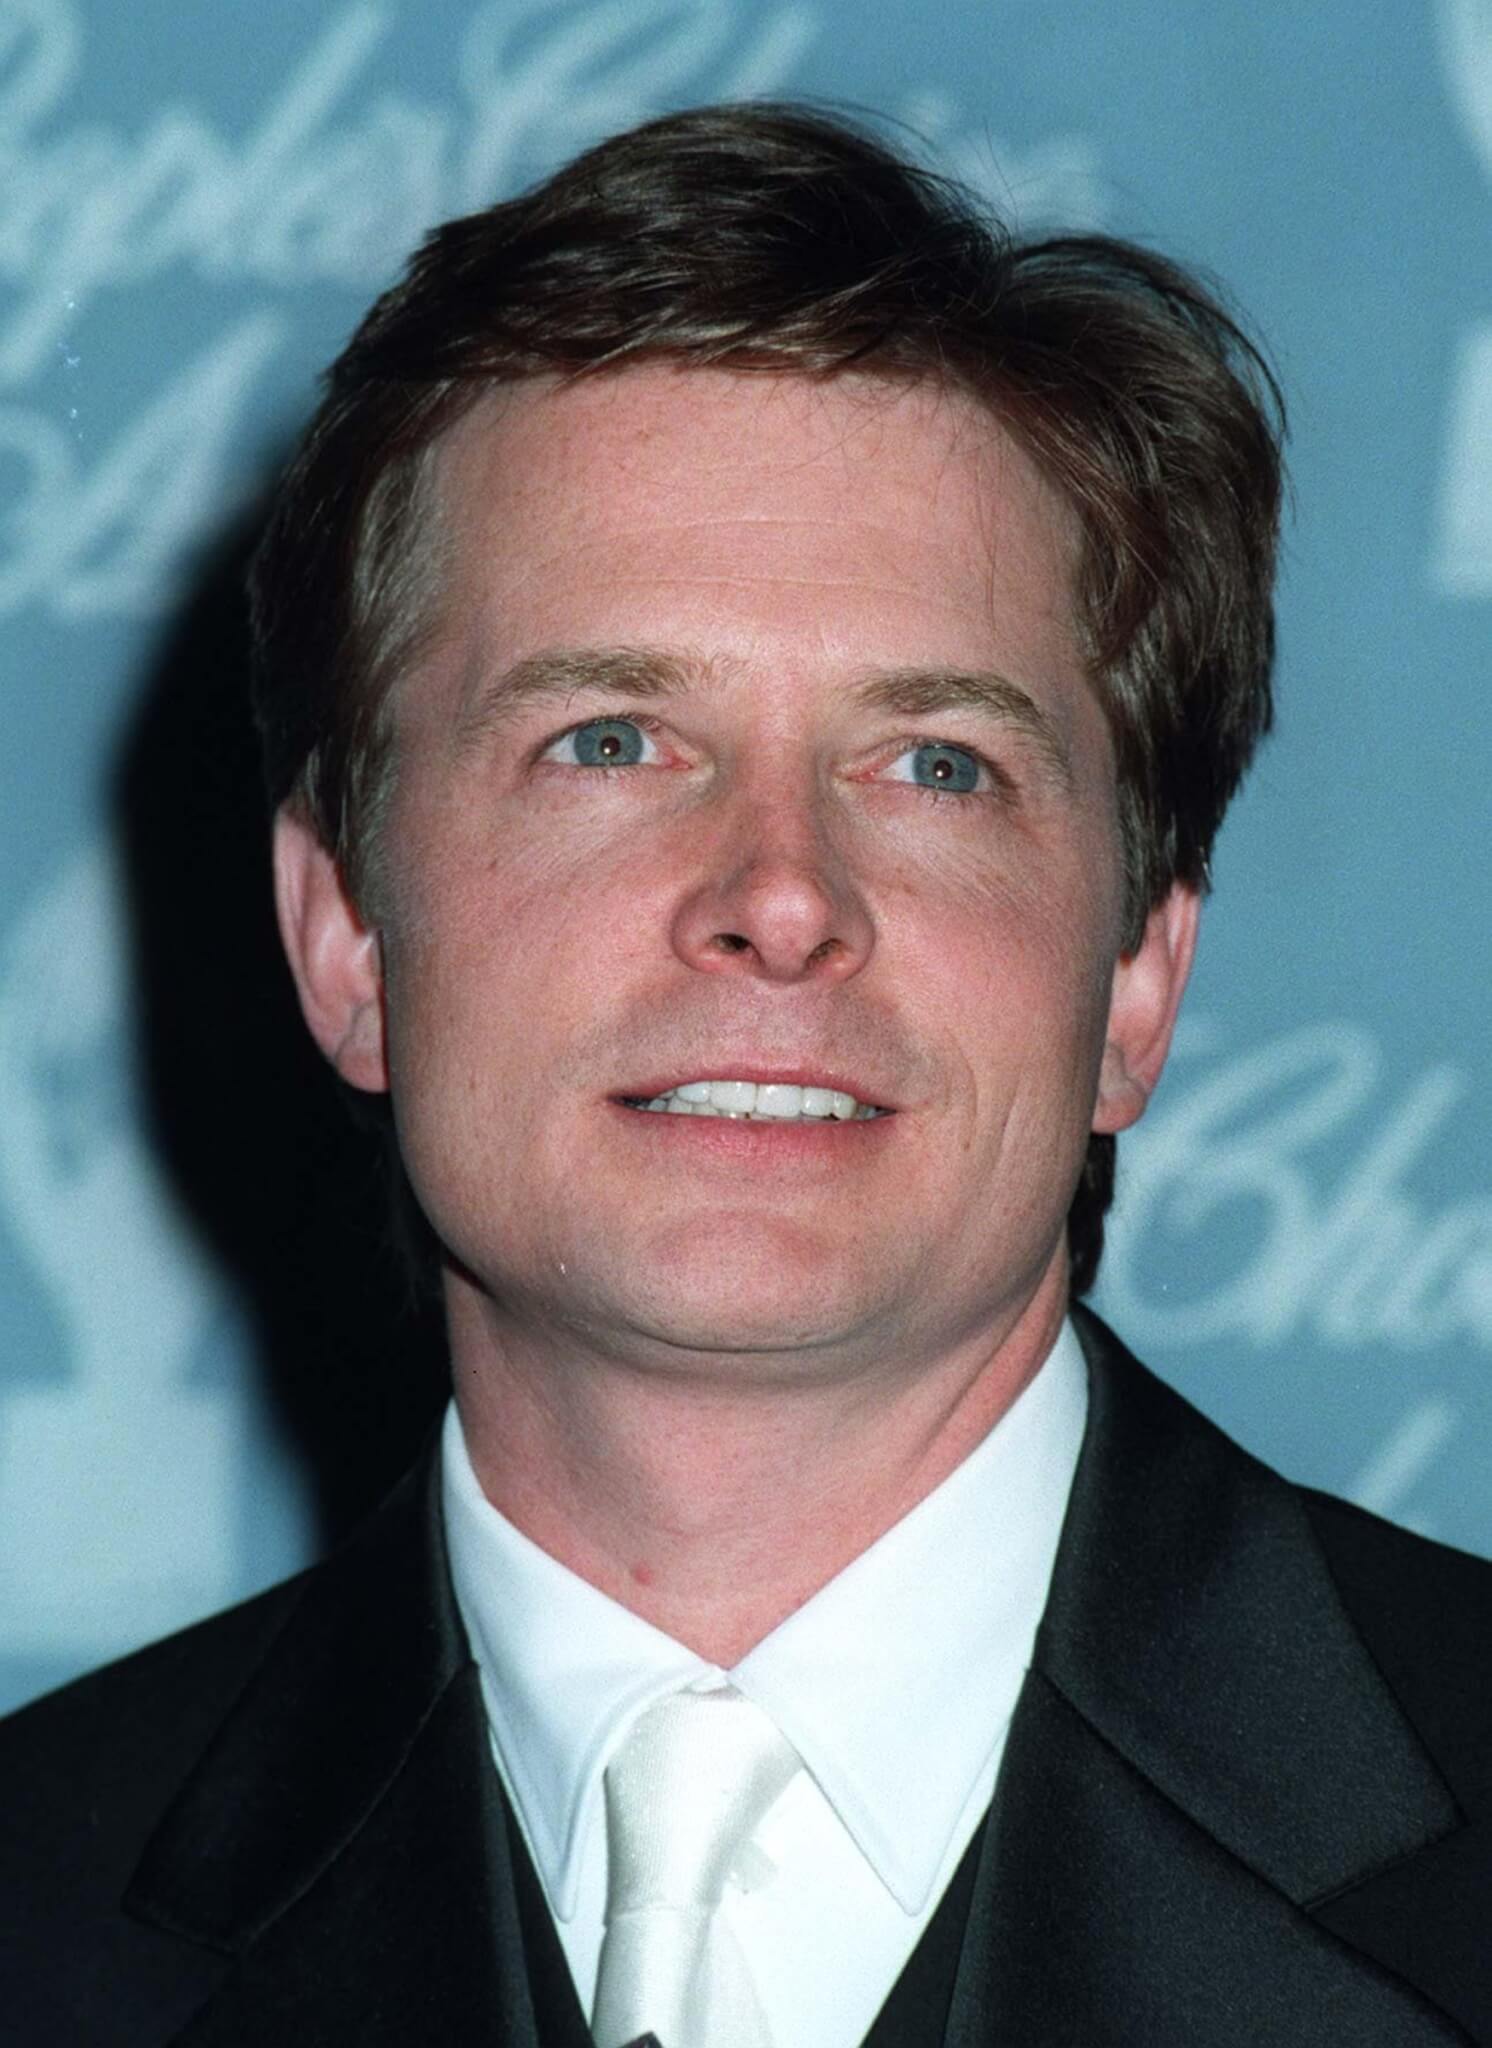 MICHAEL J. FOX at the Peoples Choice Awards in 1997 